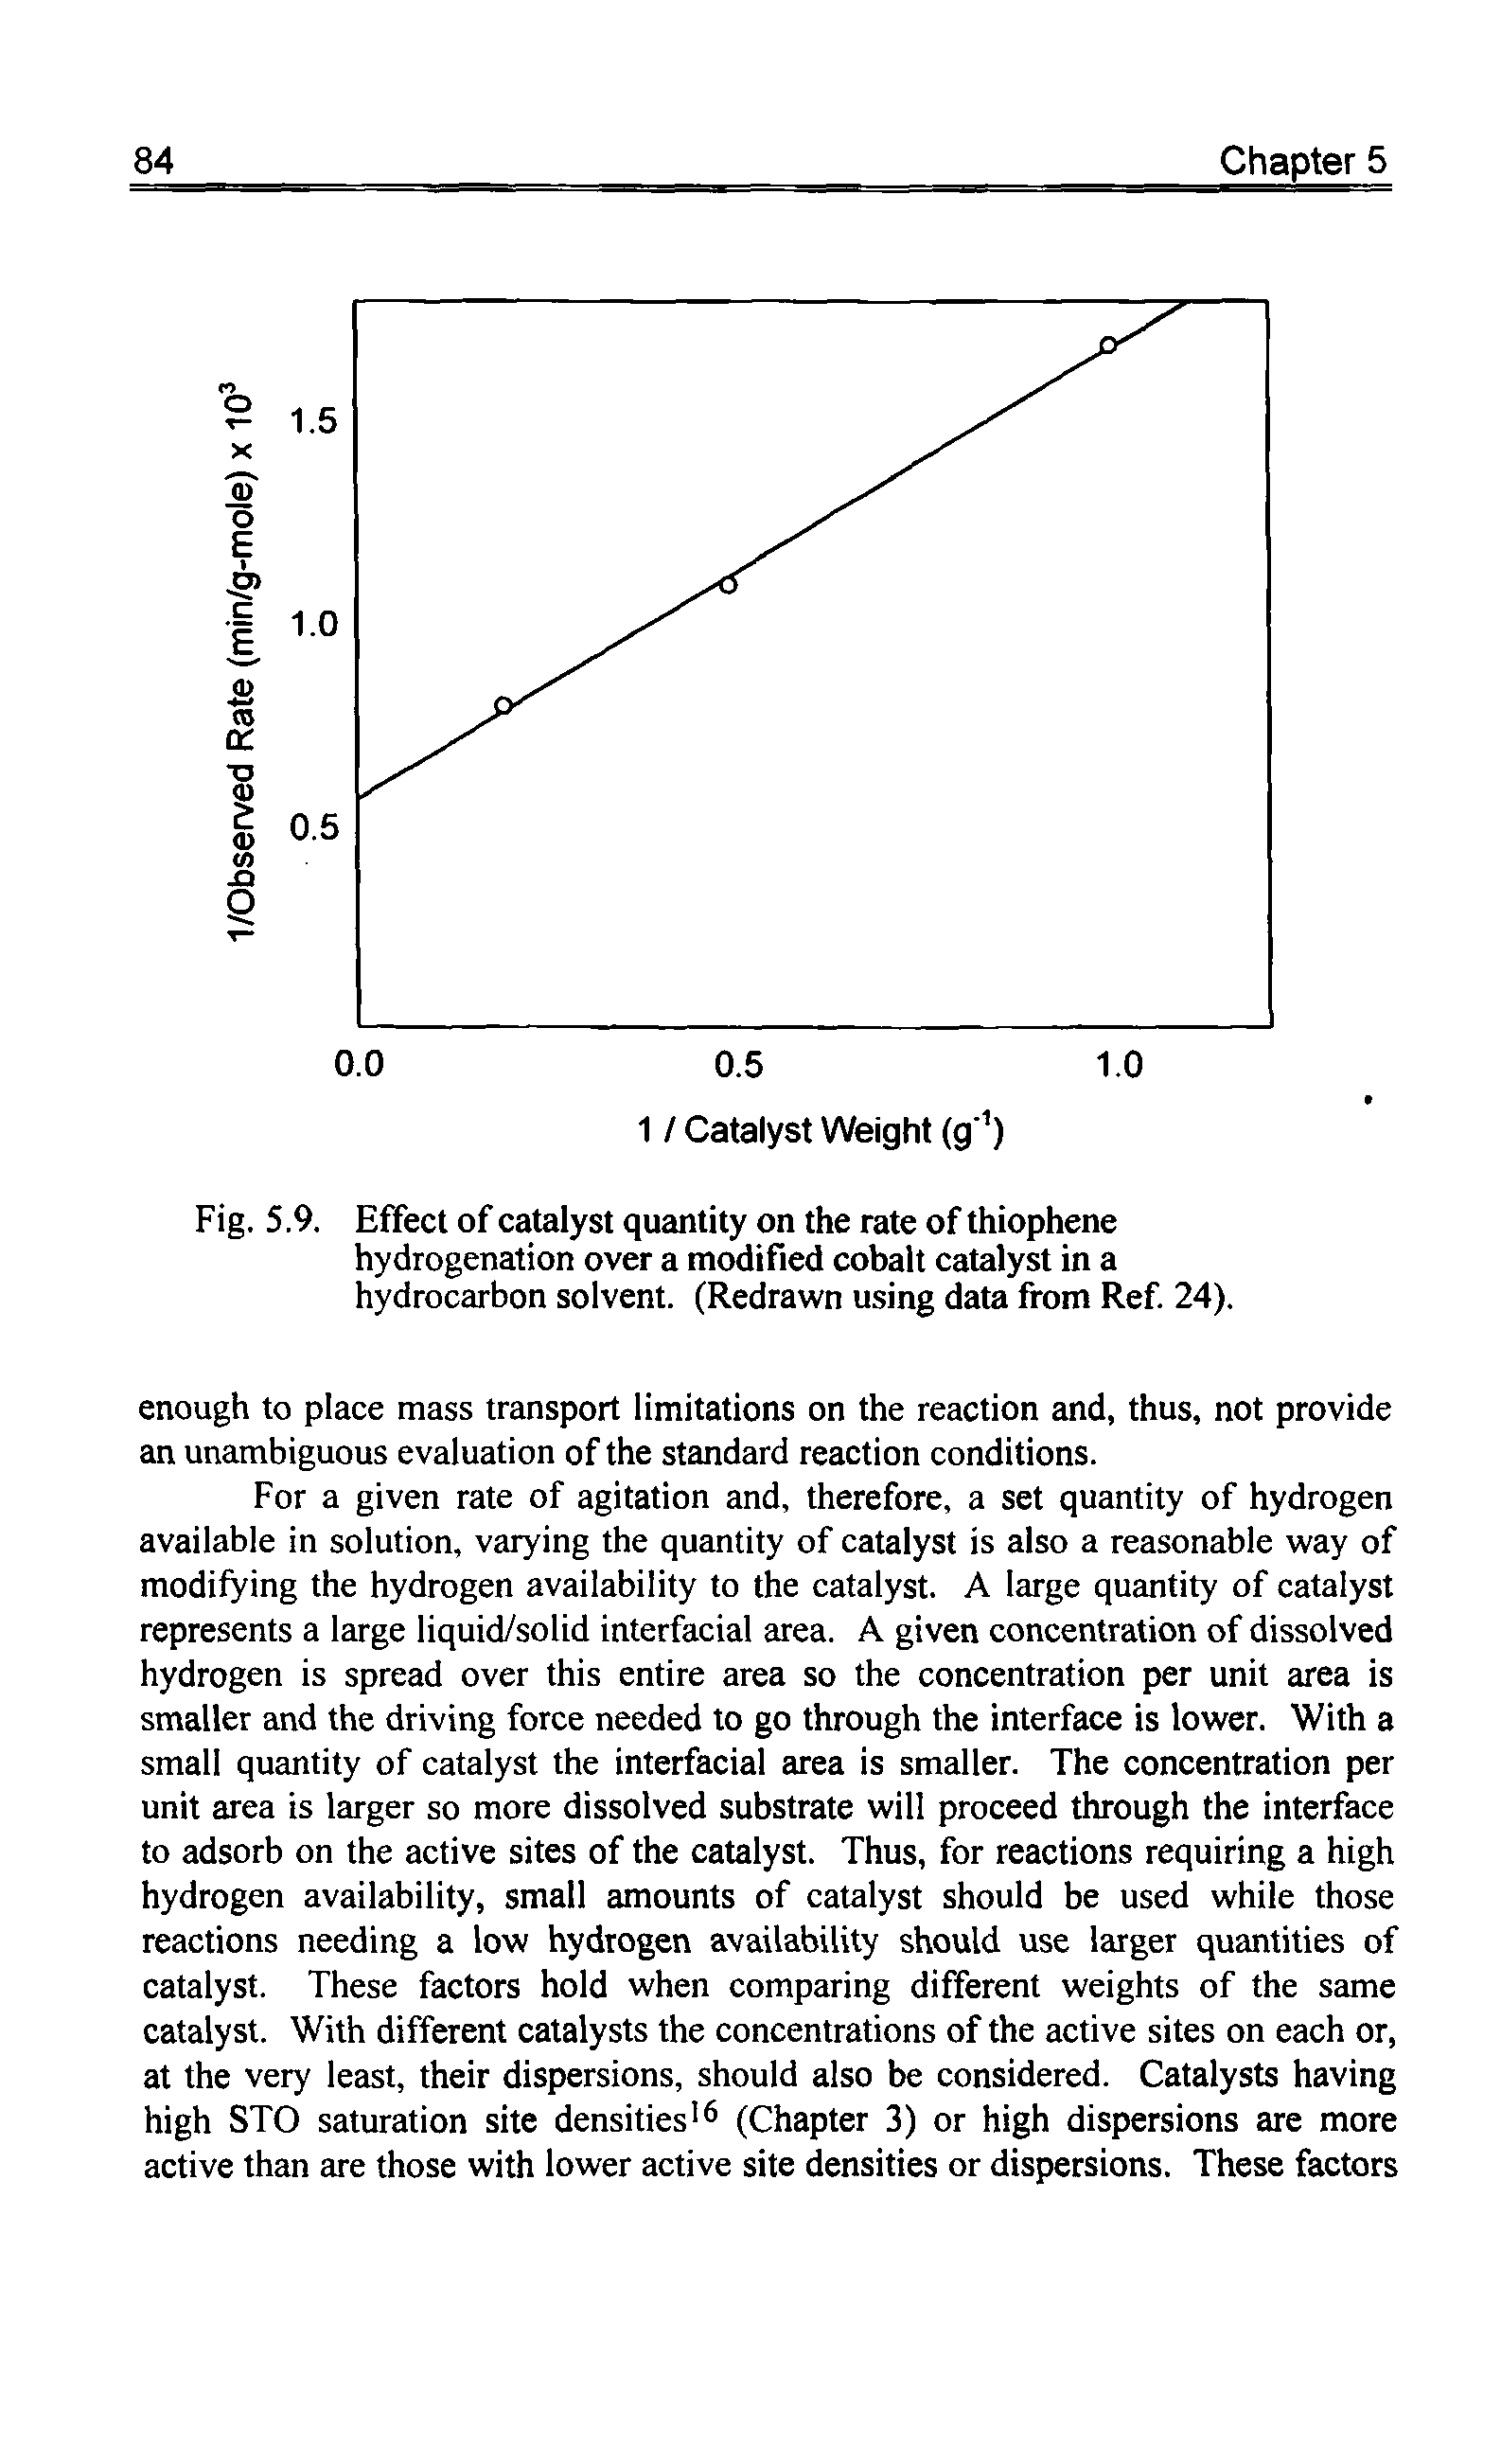 Fig. 5.9. Effect of catalyst quantity on the rate of thiophene hydrogenation over a modified cobalt catalyst in a hydrocarbon solvent. (Redrawn using data from Ref 24).